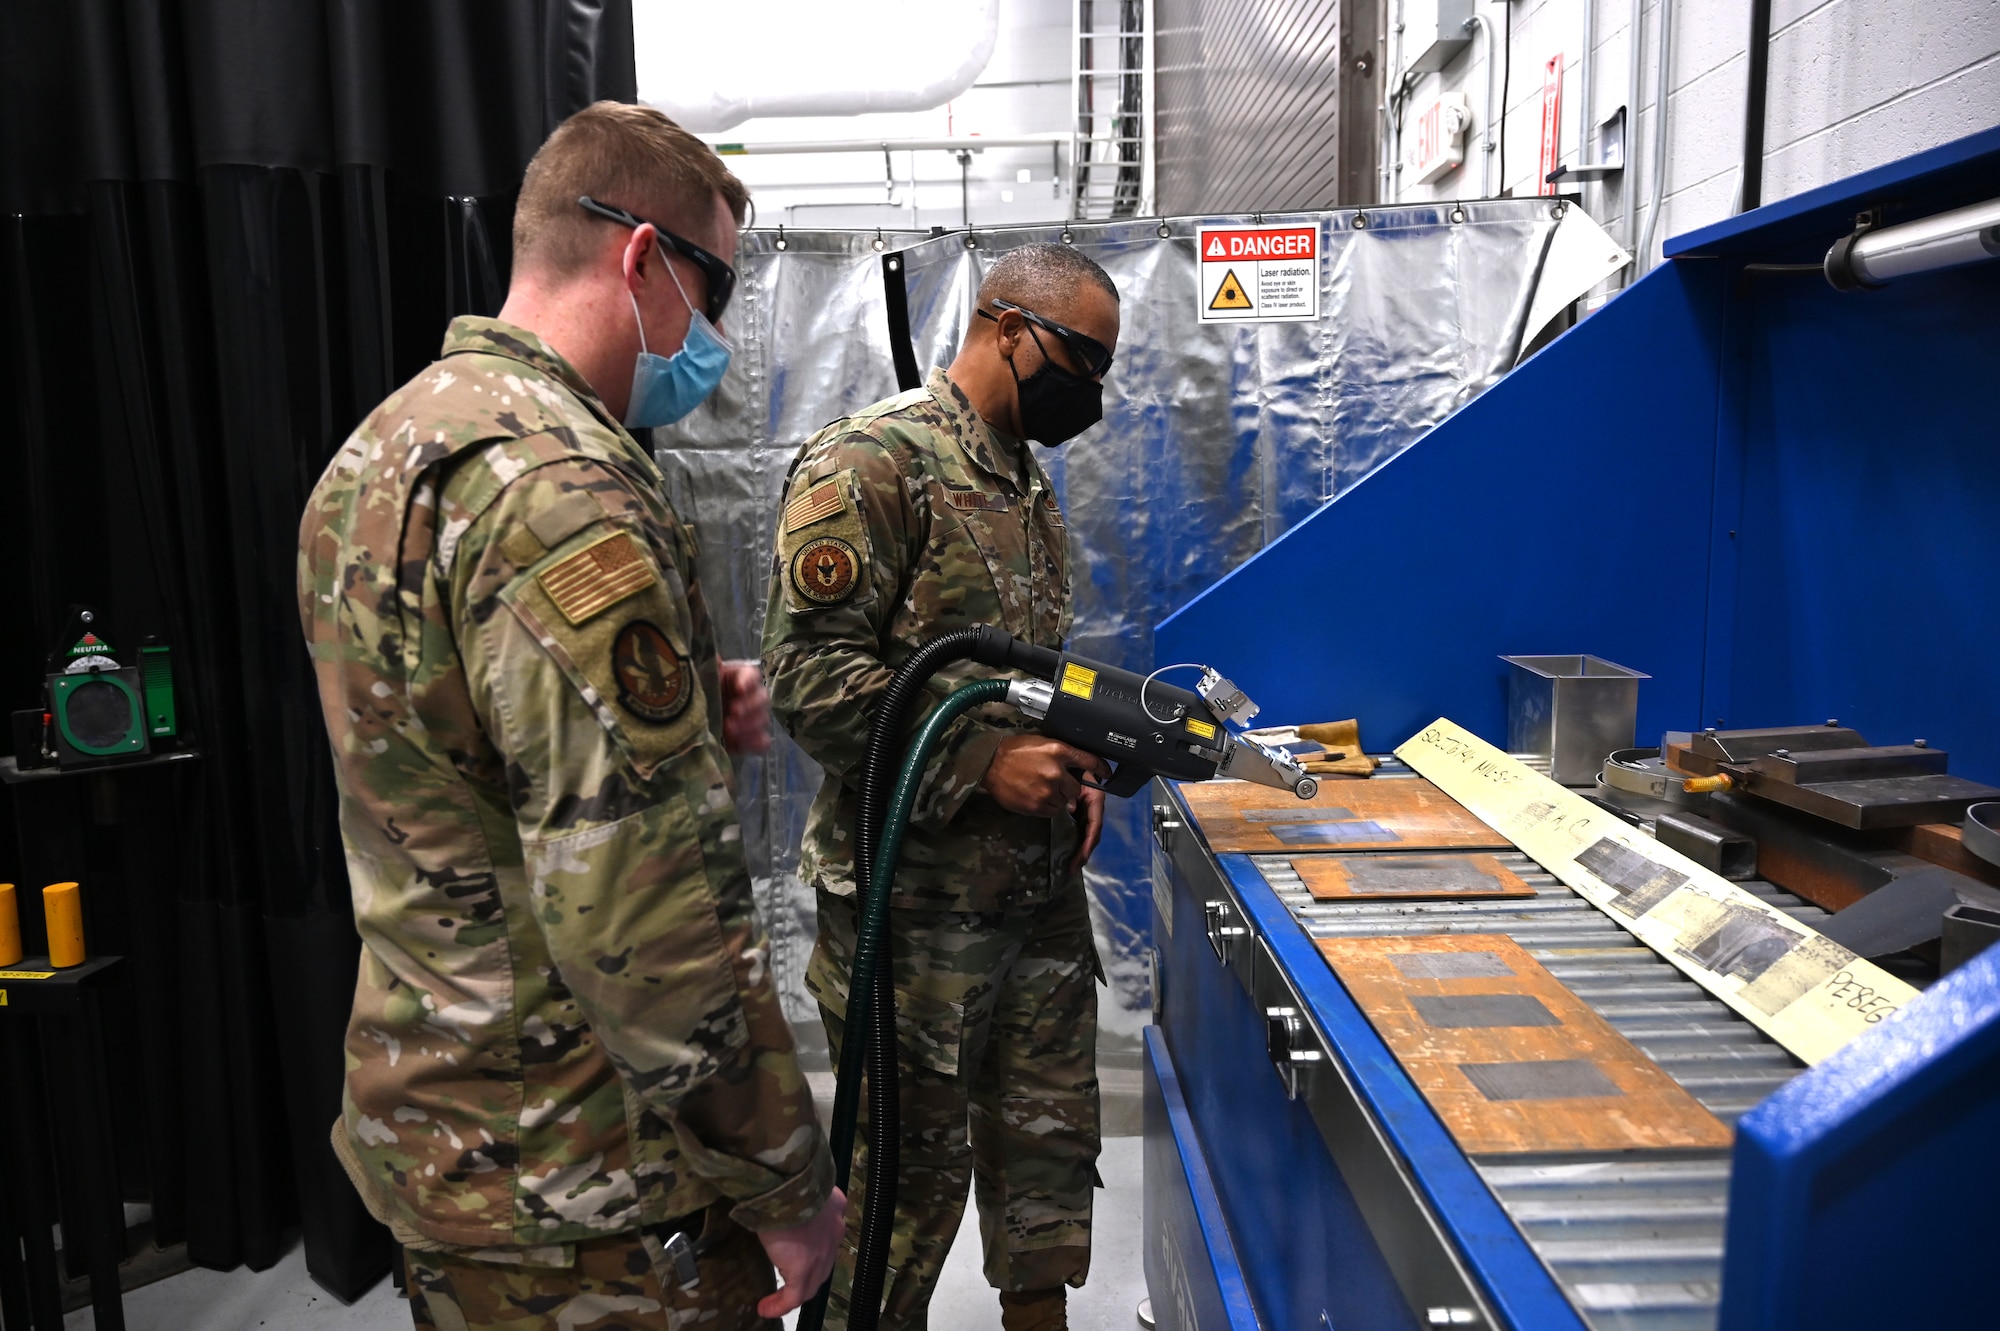 Chief Master Sgt. Timothy C. White, the Air Force Reserve Command Chief, receives instruction from Master Sgt. Michael J. Howard, 911th Maintenance Squadron sheet metal technician, at the Pittsburgh International Airport Air Reserve Station, Pennsylvania, Jan. 8, 2022.